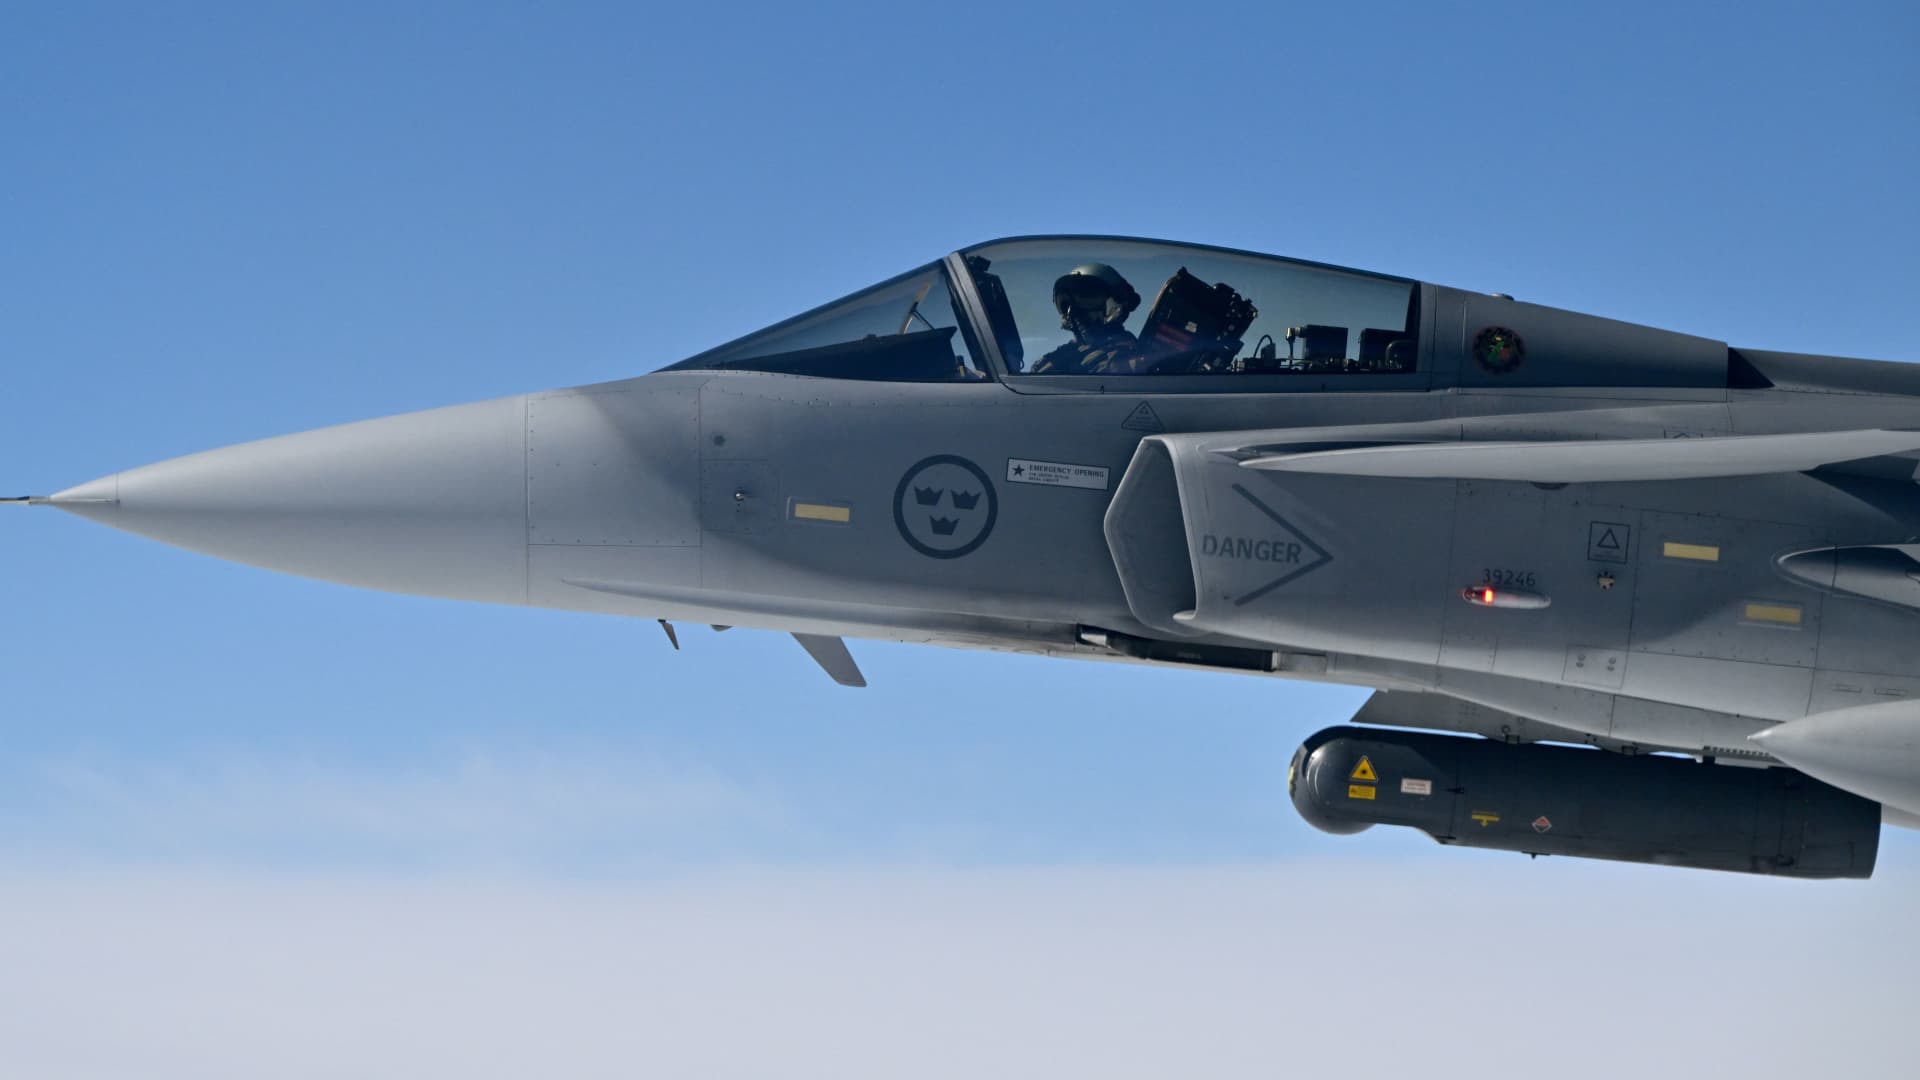 A Swedish Air Force Saab JAS 39 Gripen jetfighter takes part in the NATO exercise as part of the NATO Air Policing mission, in Alliance members' sovereign airspace on July 4, 2023.